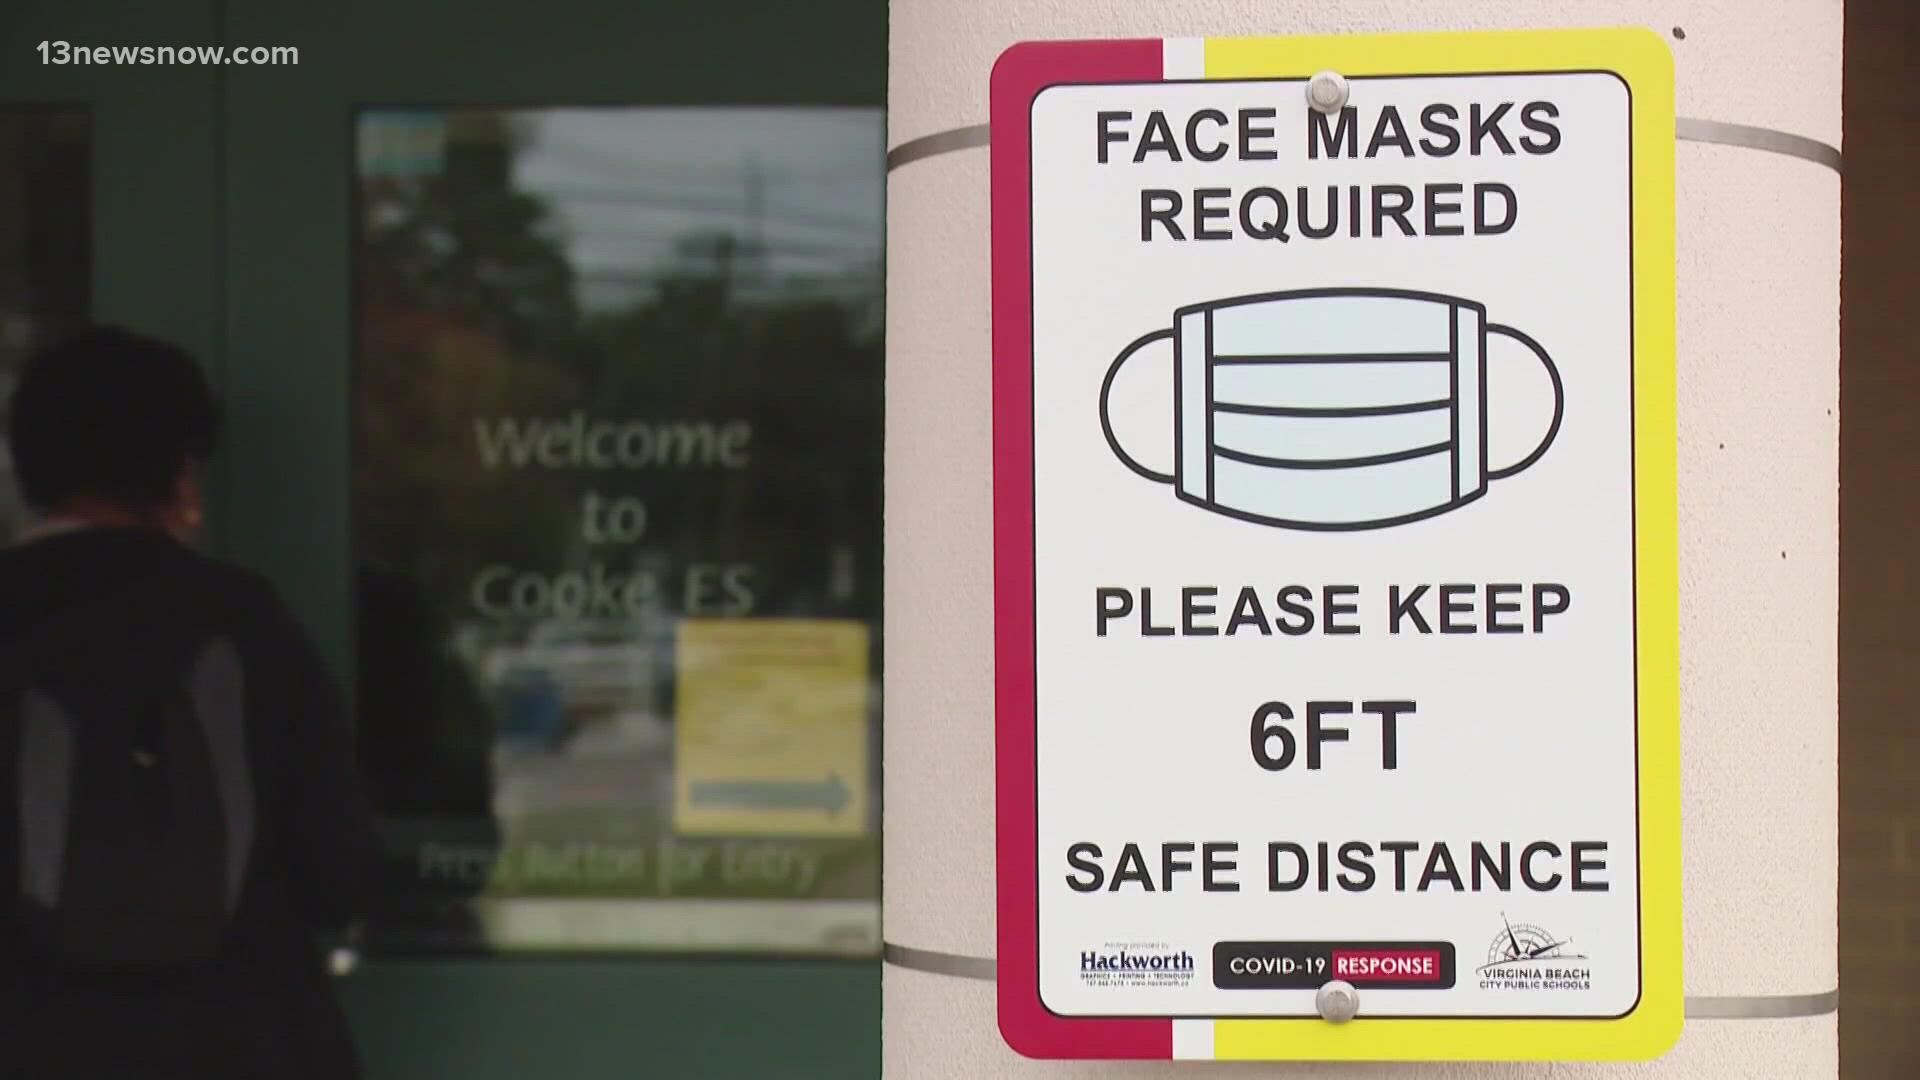 "I think masks are the only safety mitigation strategy that VBCPS has left," one parent said. She said she'd be afraid to send her daughter to a mask-optional school